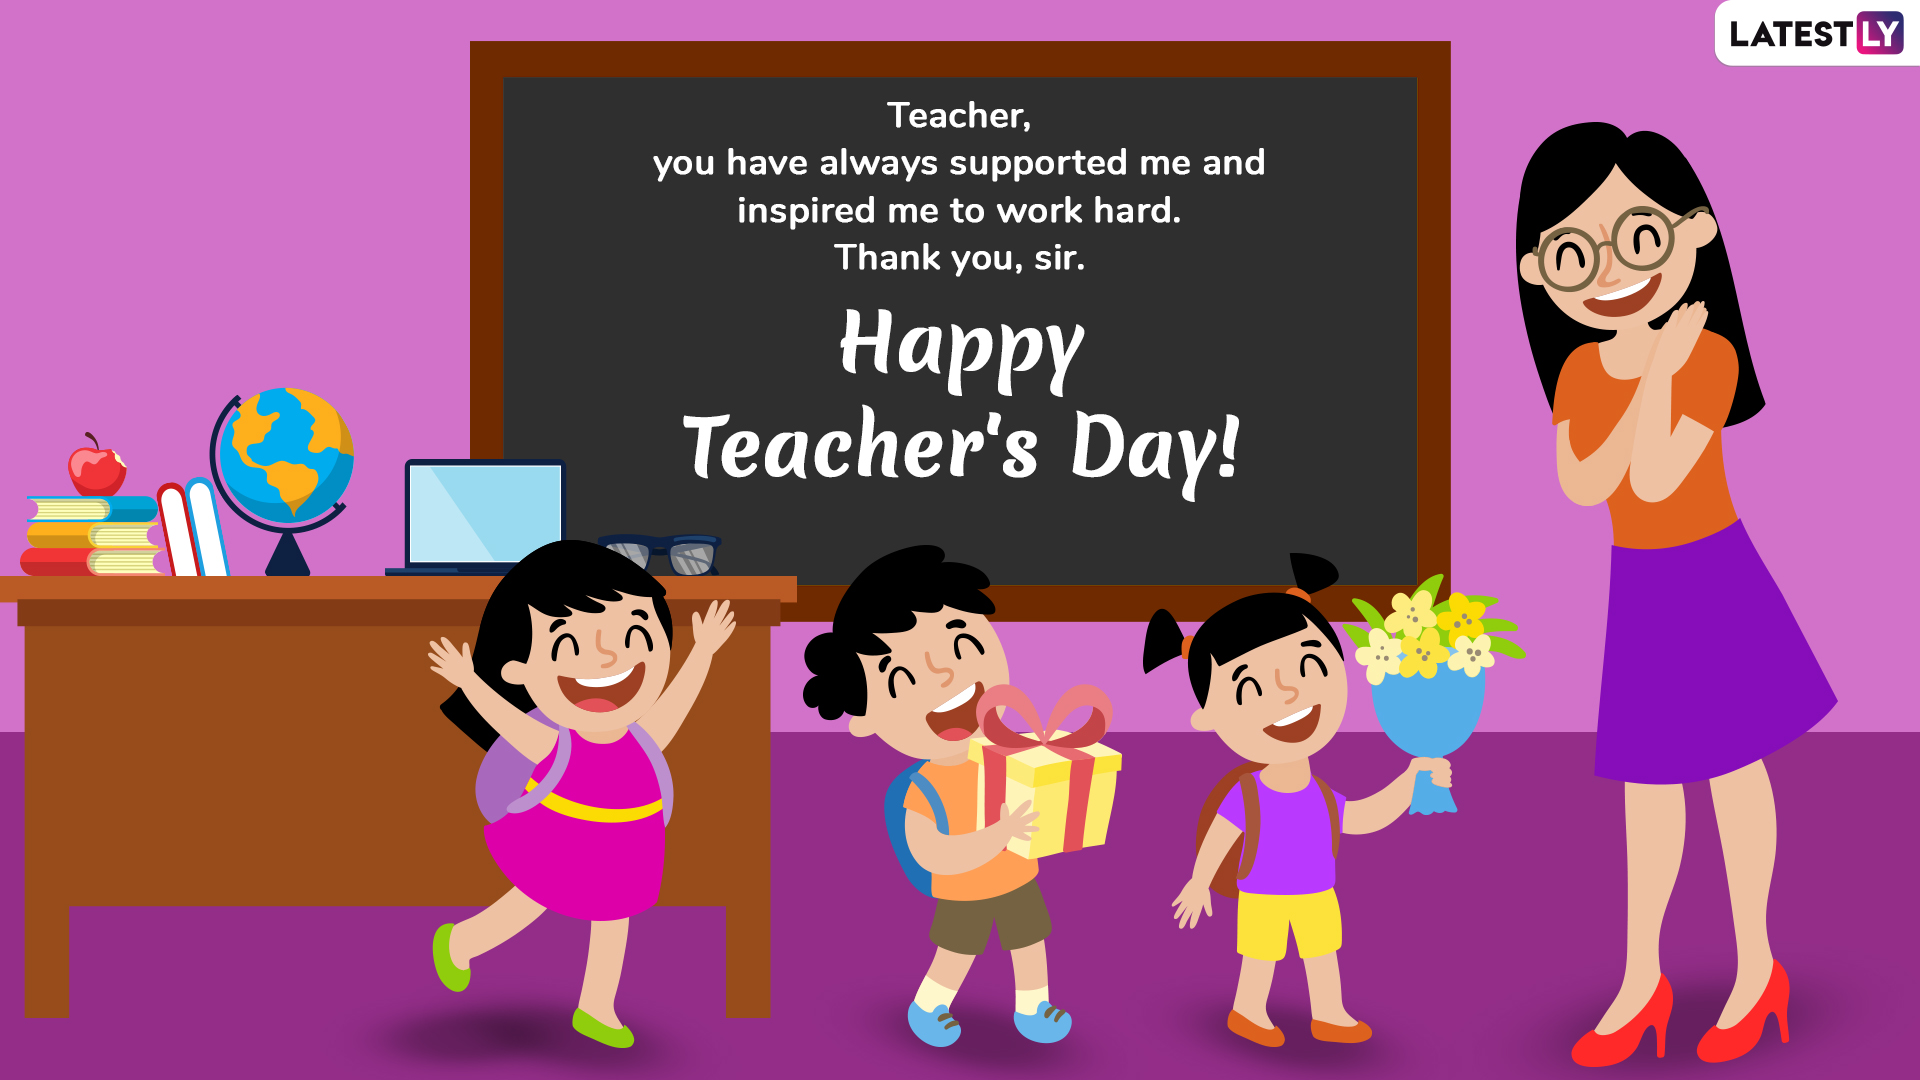 Teachers' Day 2021 Quotes & HD Image: WhatsApp Messages, GIFs, Facebook Greetings, Wallpaper and SMS To Celebrate Your Teachers